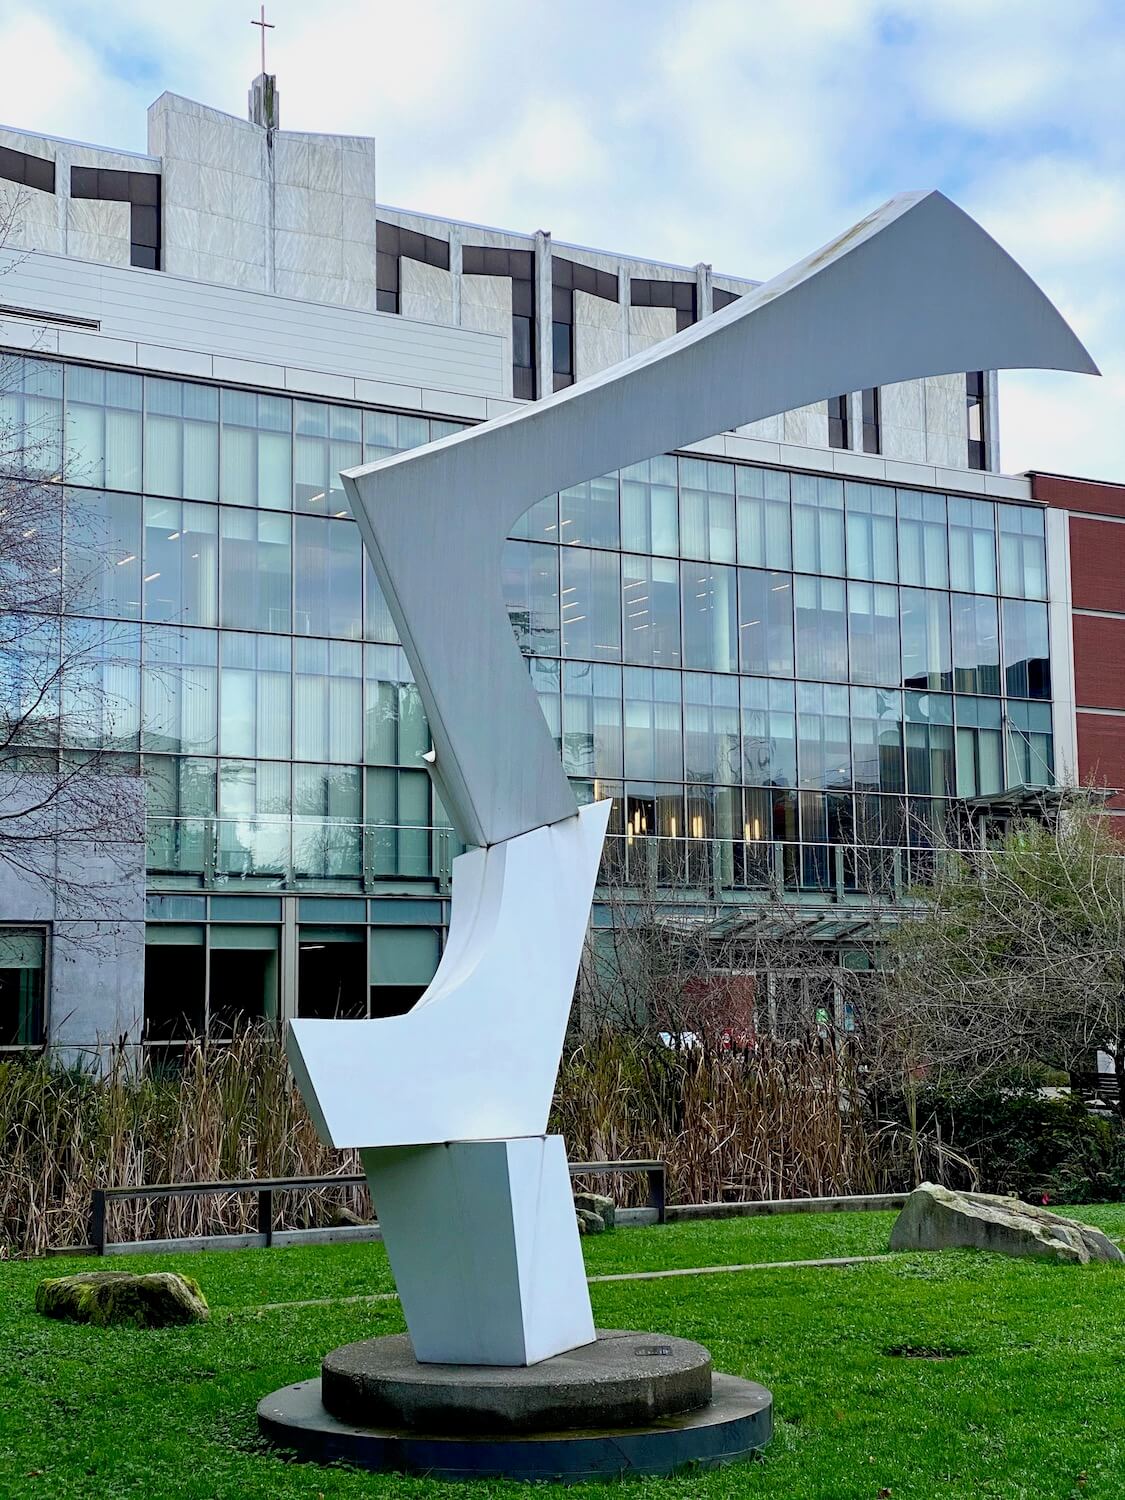 Art at Seattle University in the middle of the grass covered quad area. A large metallic sculpture is the centerpiece against shiny glass windows of the student union building.